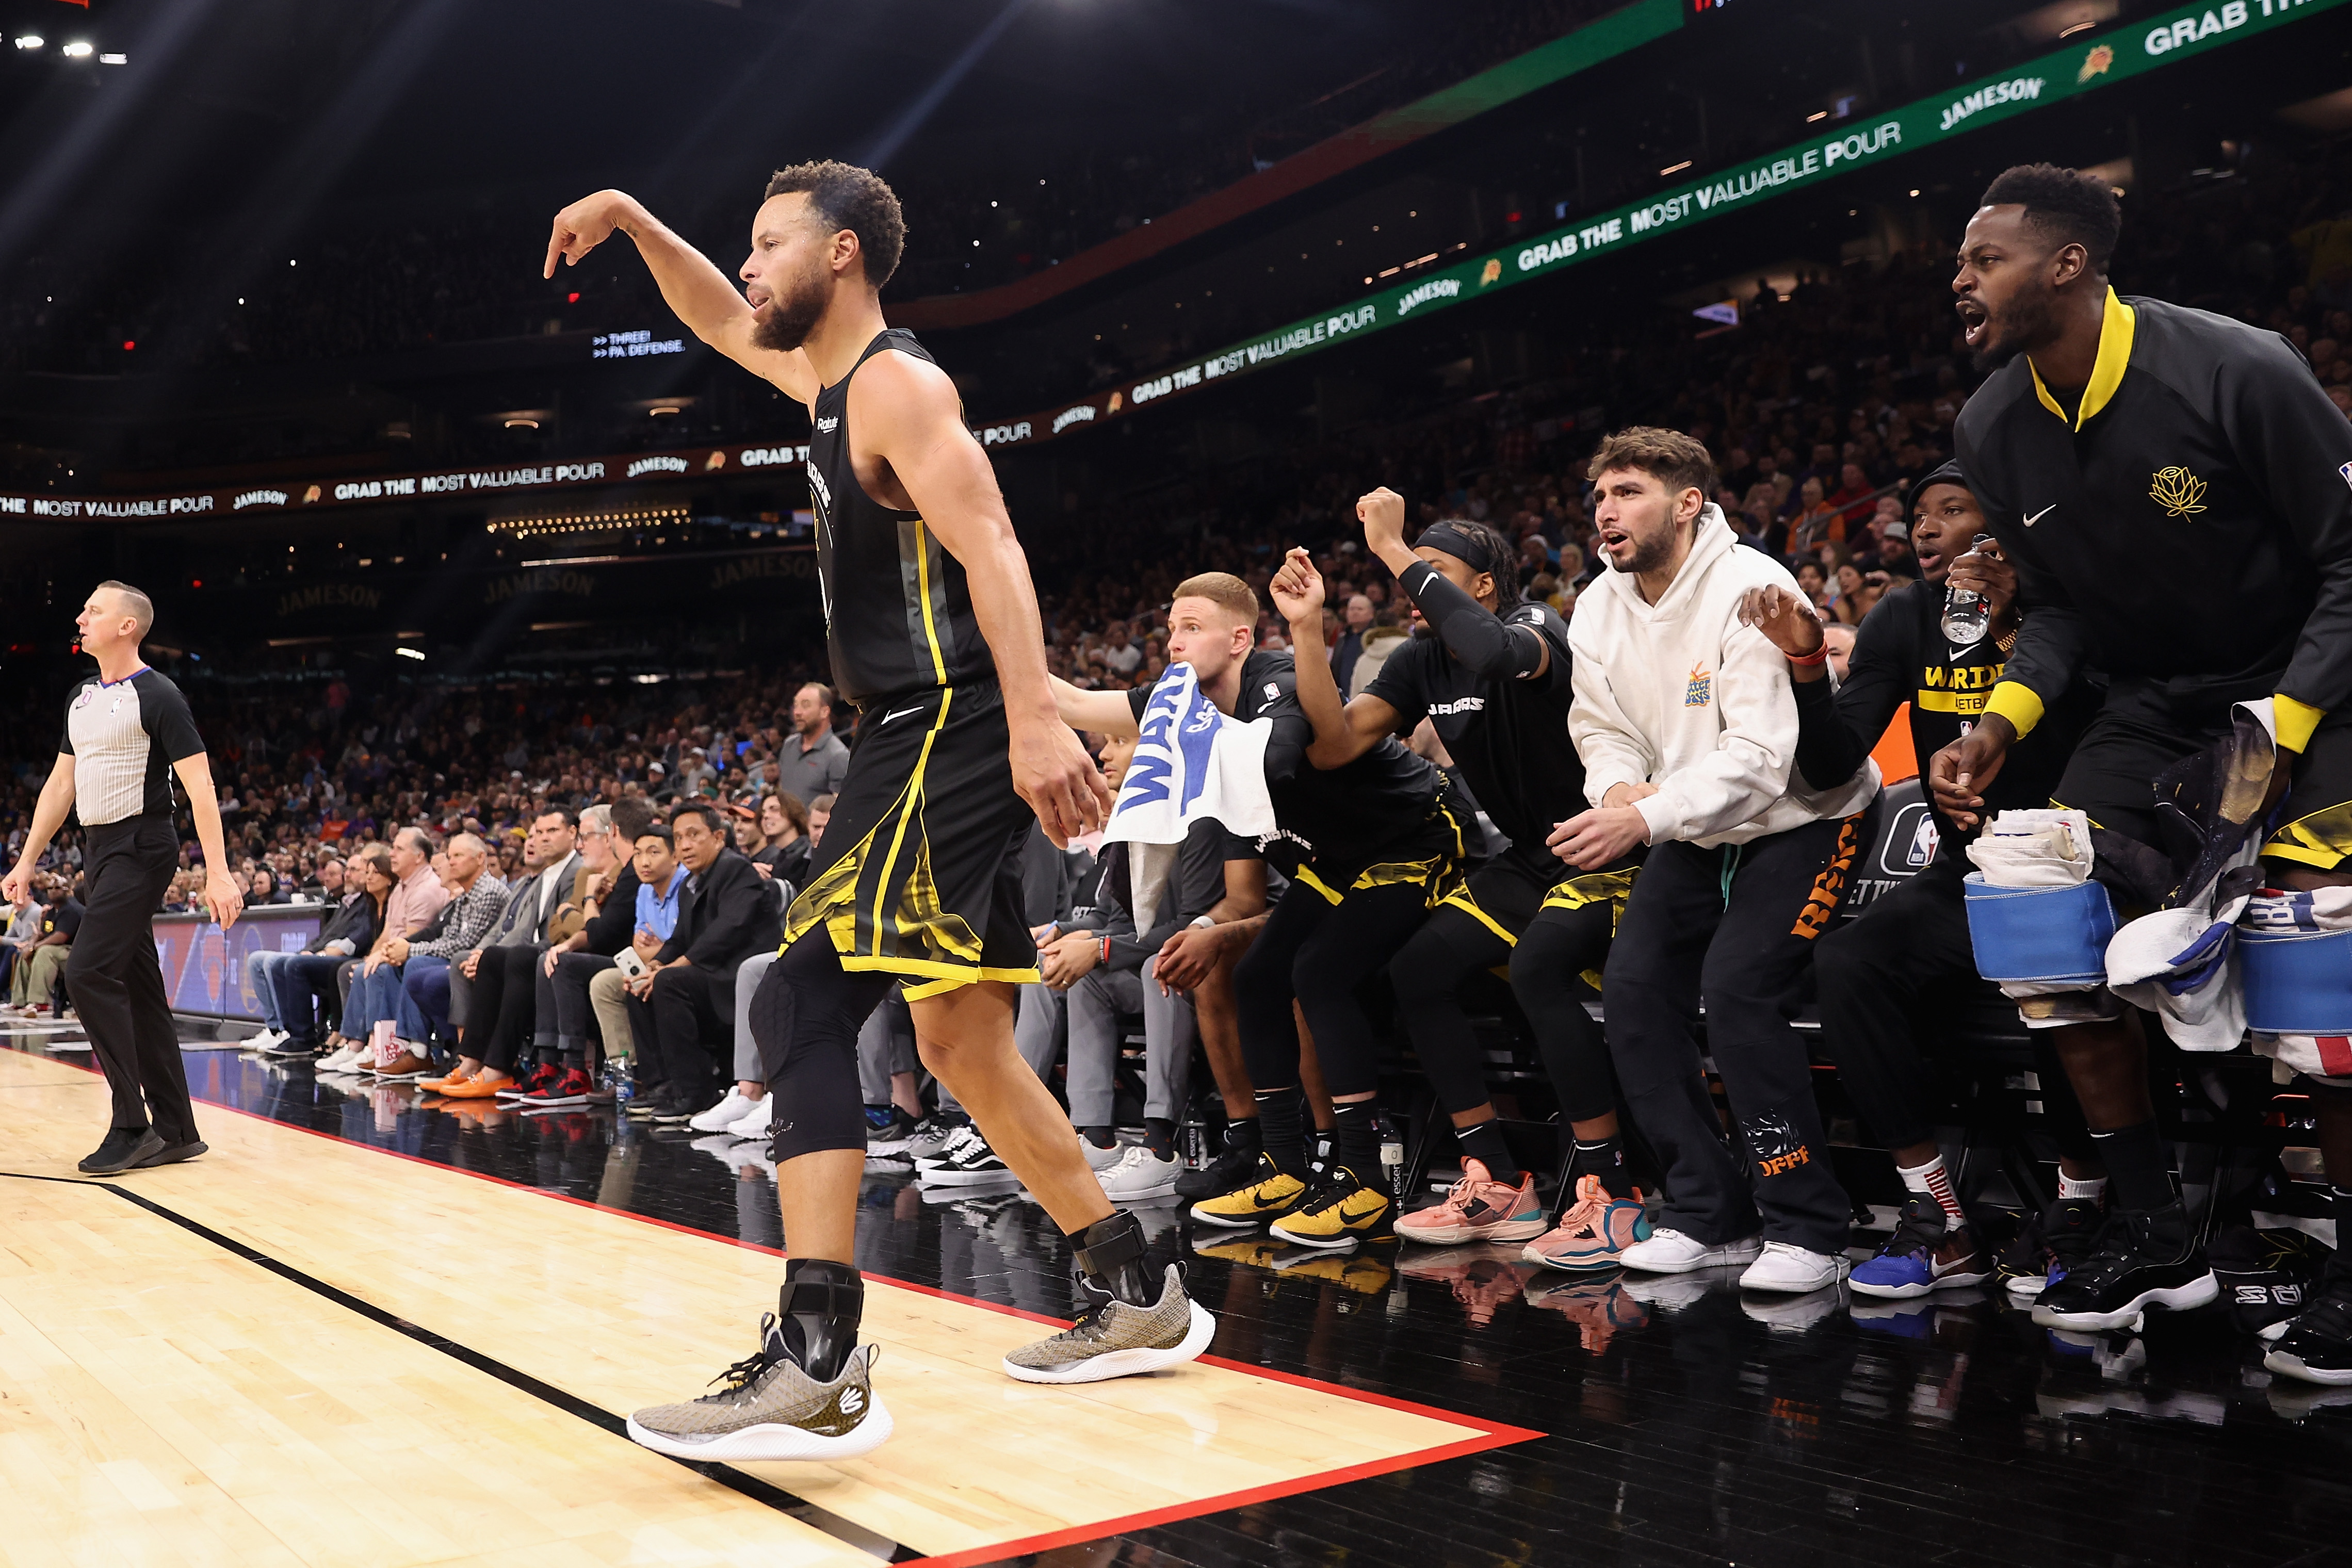 Curry scores 50 points, but Suns beat Warriors 130-119